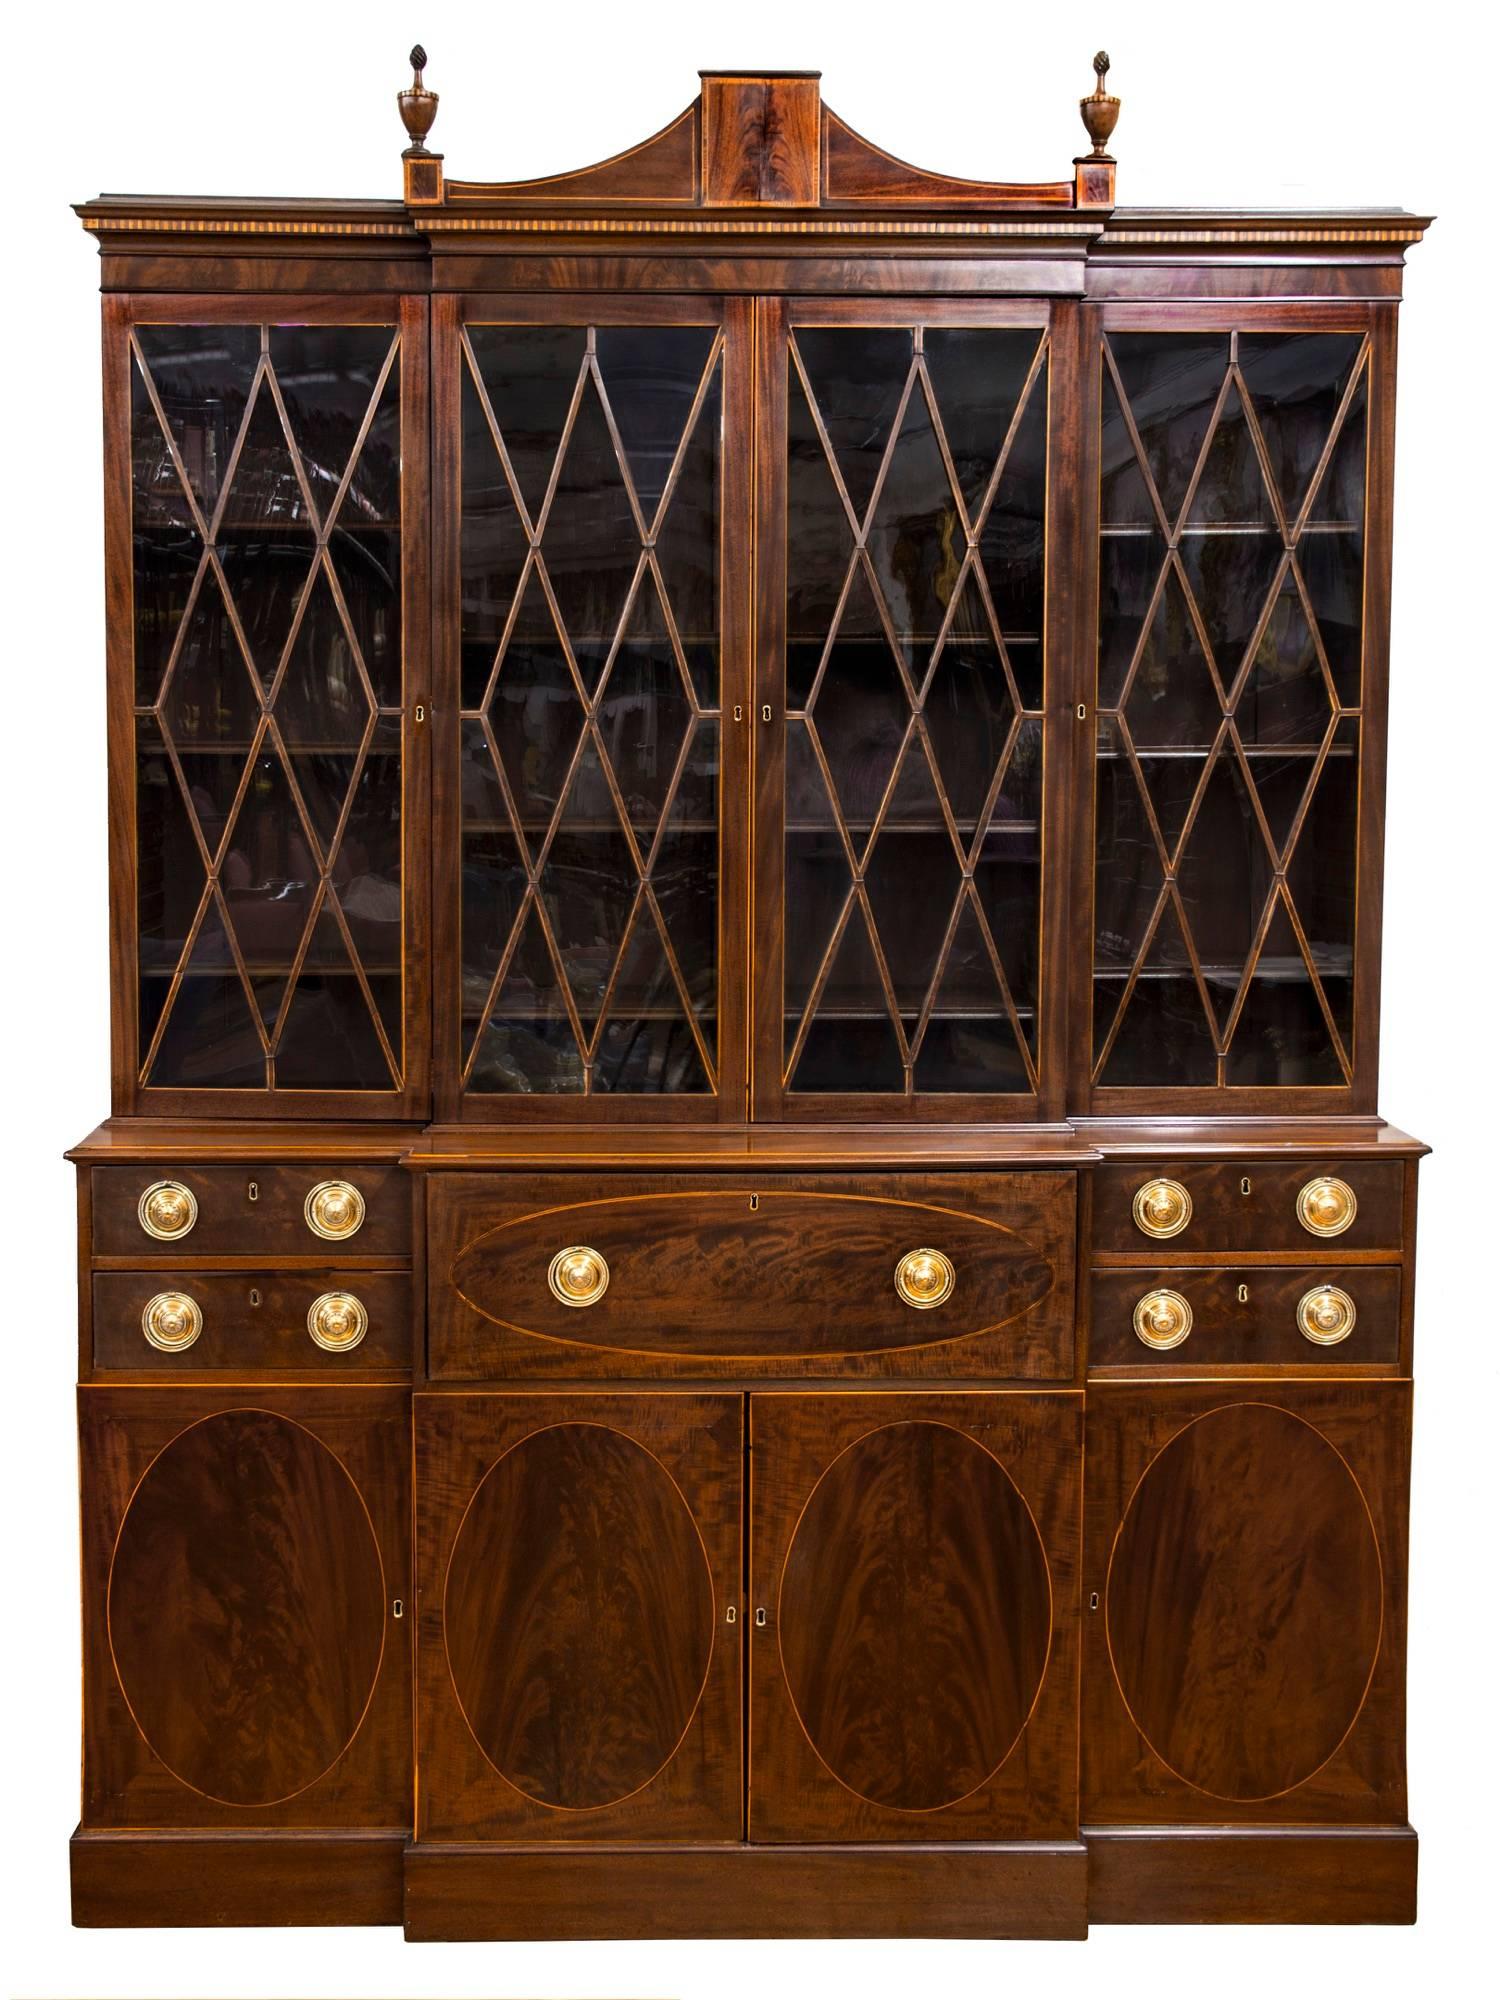 This breakfront was part of a superb collection of colonial furniture owned by Francis Hill Bigelowe of Cambridge MA, sold at the Anderson Galleries (later Sotheby's) in 1924. In all likelihood, this is a Rhode Island made piece as all the secondary